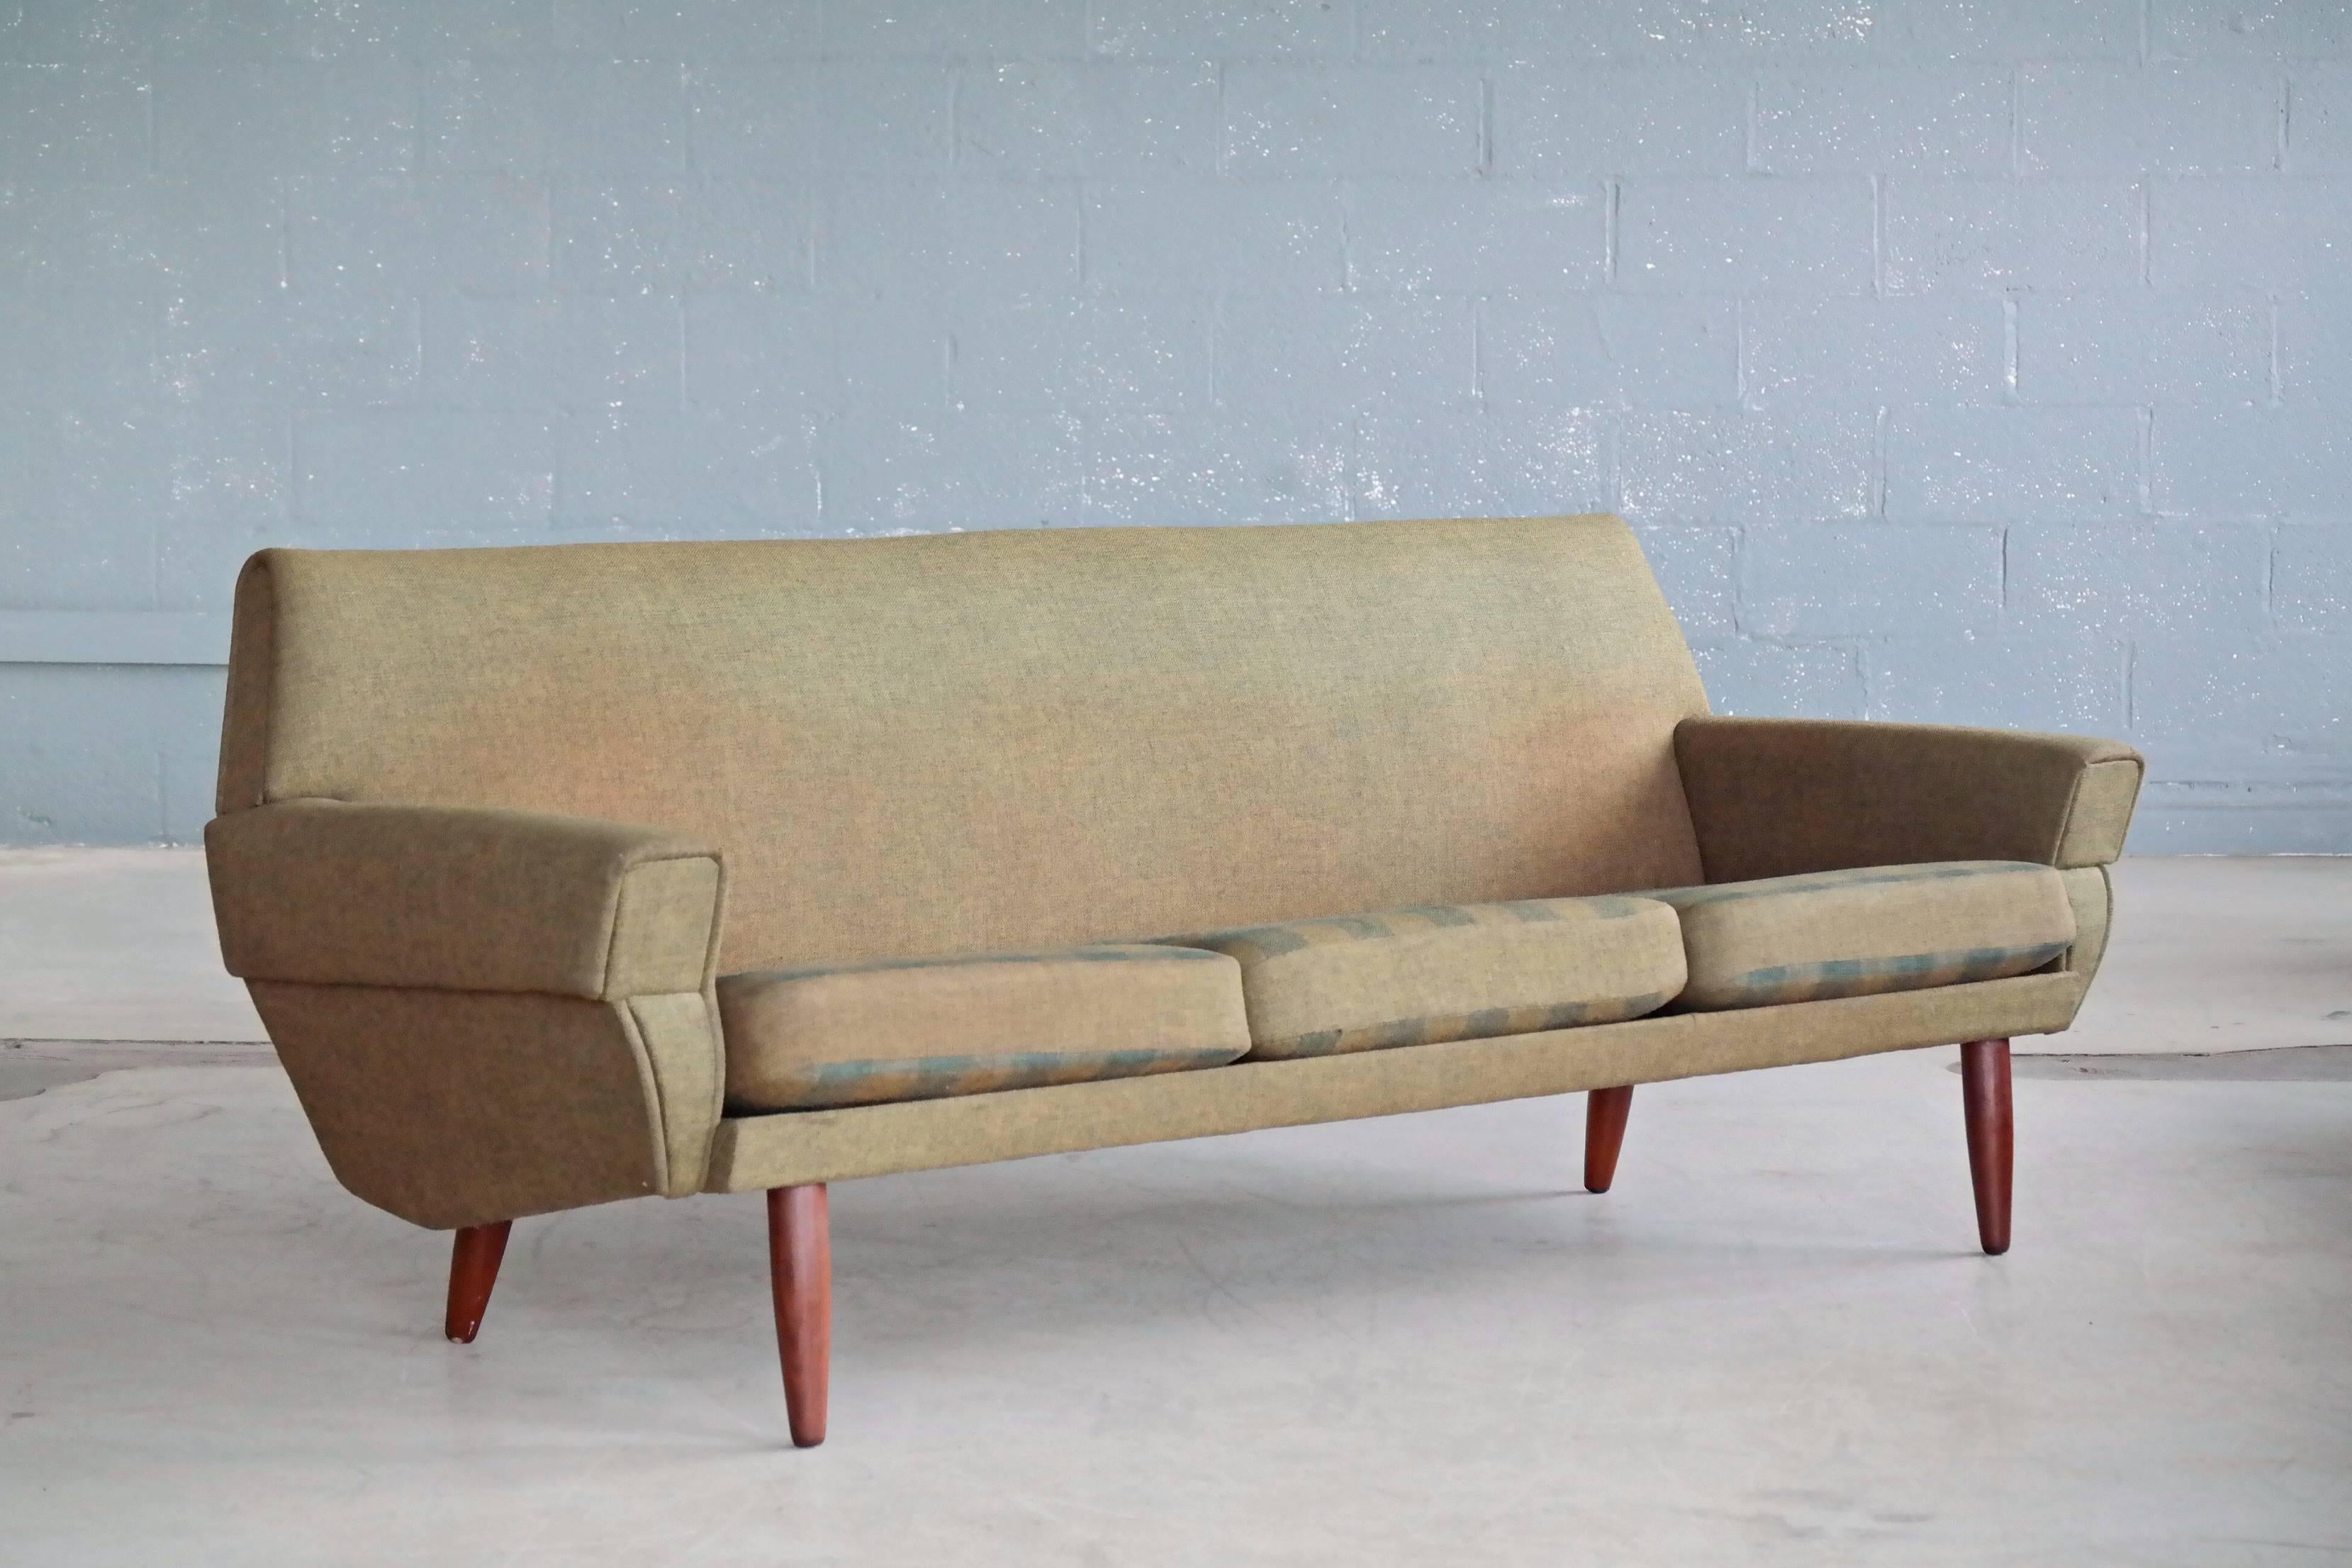 Classic Danish 1960s designed living room set. Based on the style and build quality it appears to be made by either Ryesberg or Rolschau Mobler of Denmark both of which produced furniture for Designer Kurt Ostervig. This sofa is very reminiscent of